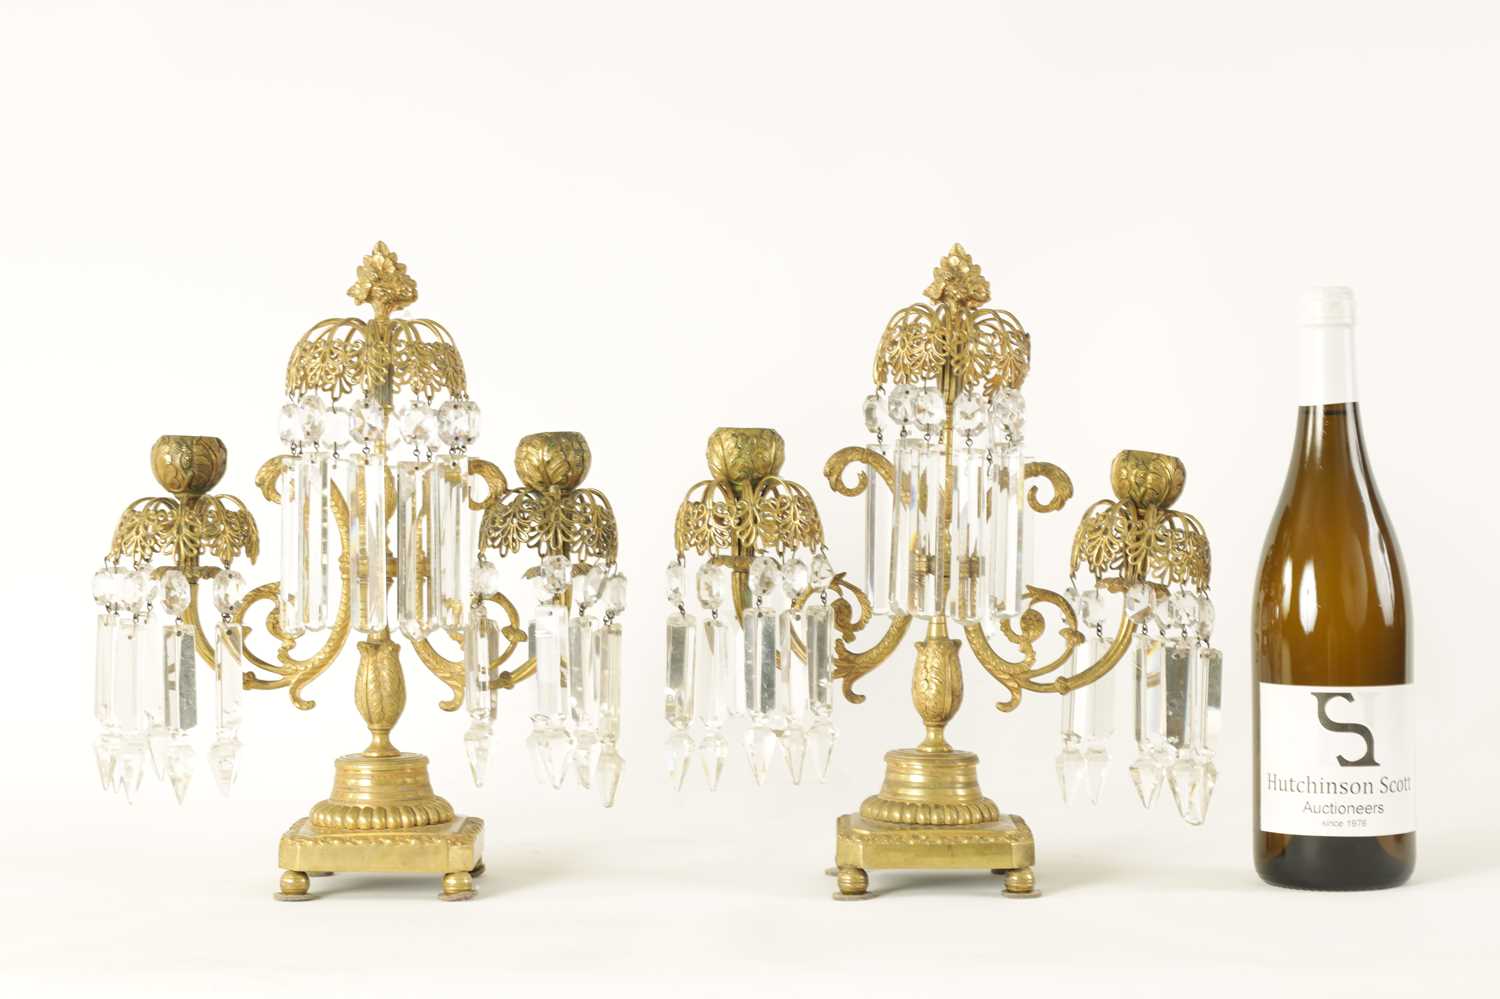 A PAIR OF 19TH CENTURY BRASS AND CUT GLASS CANDELABRA - Image 2 of 9